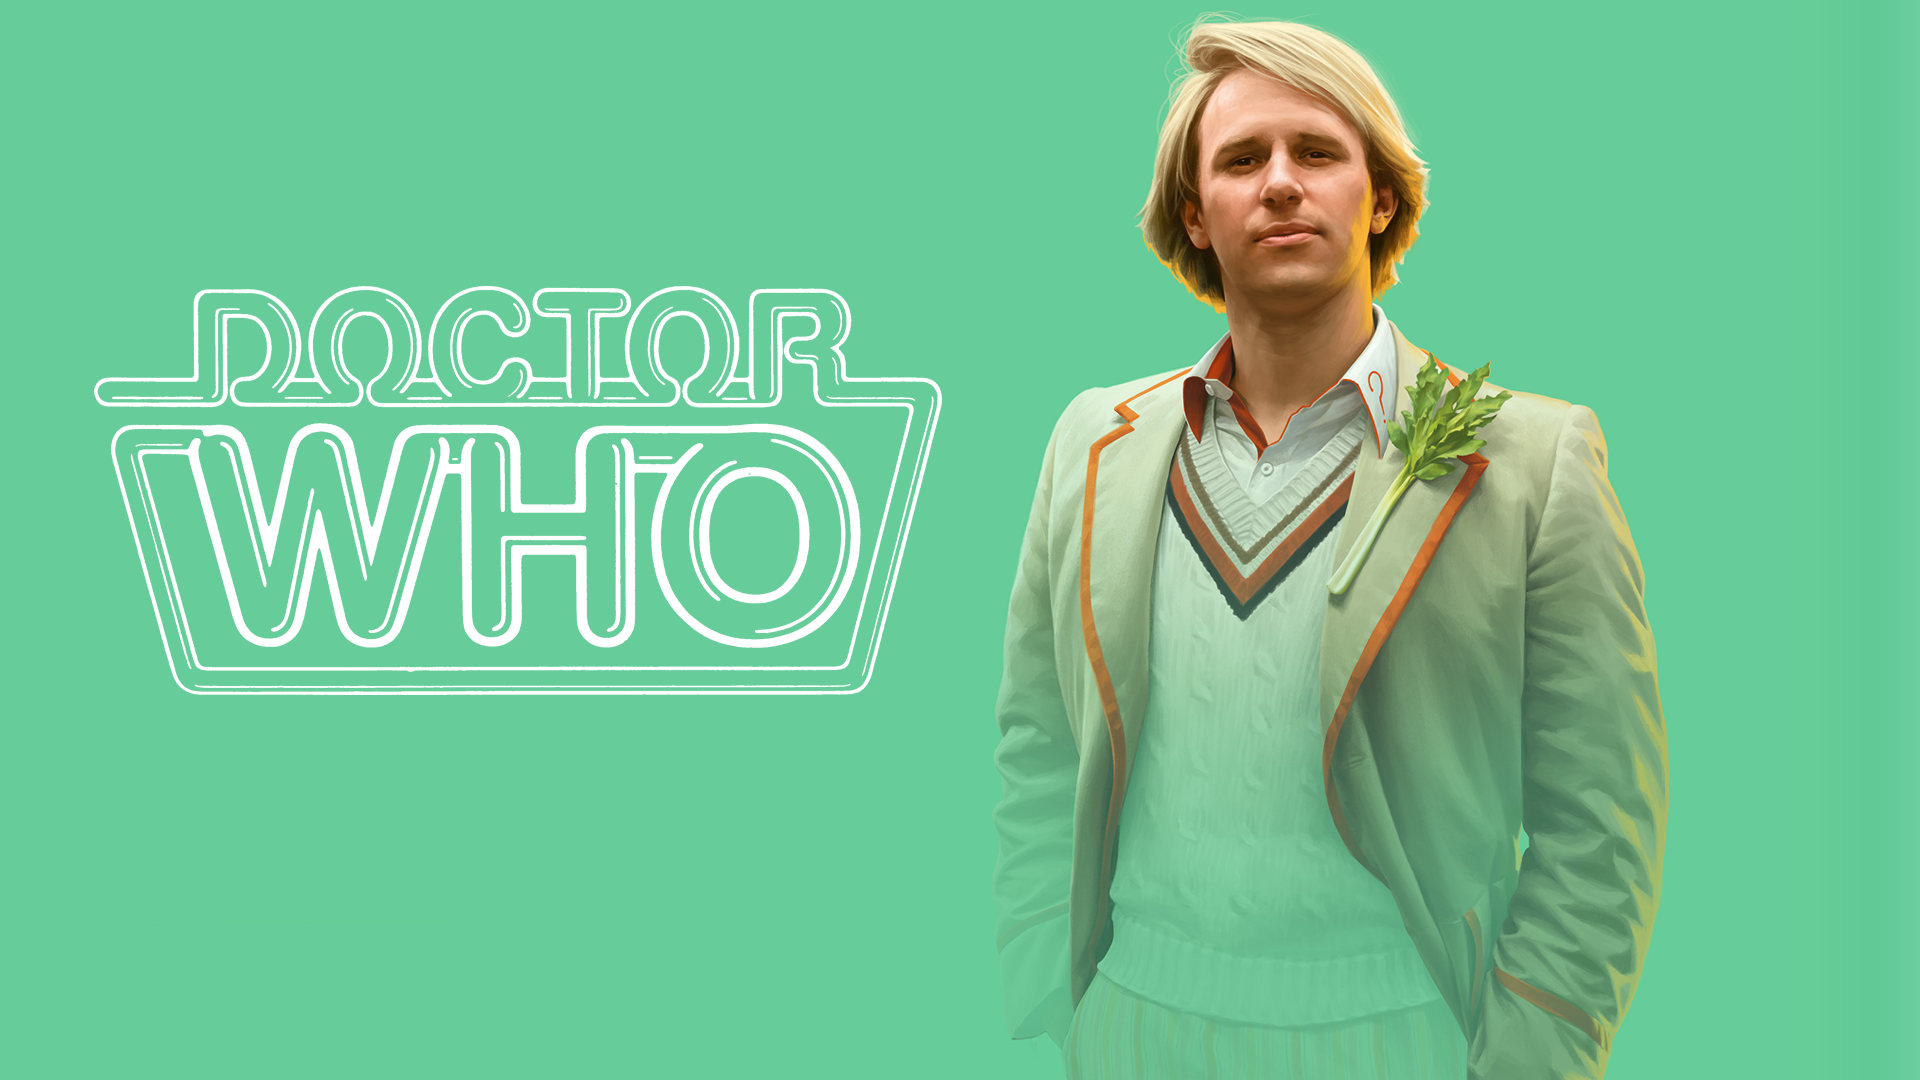 Doctor Who - Fifth Doctor Wallpaper by Spirit--Of-Adventure on DeviantArt